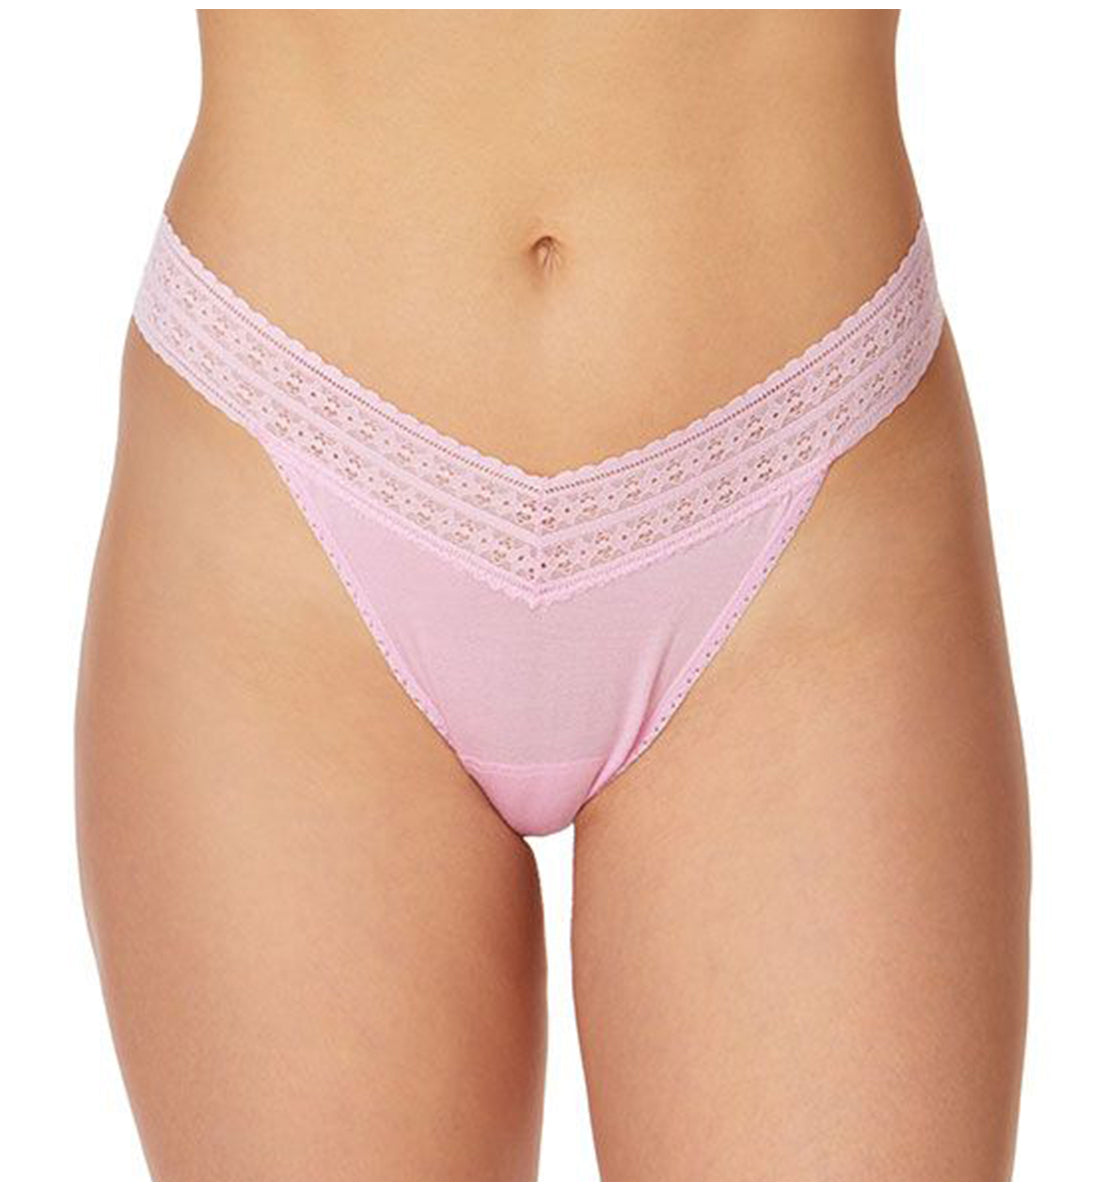 Hanky Panky DreamEase Original Rise Thong (631104),Cotton Candy Pink - Cotton Candy Pink,One Size